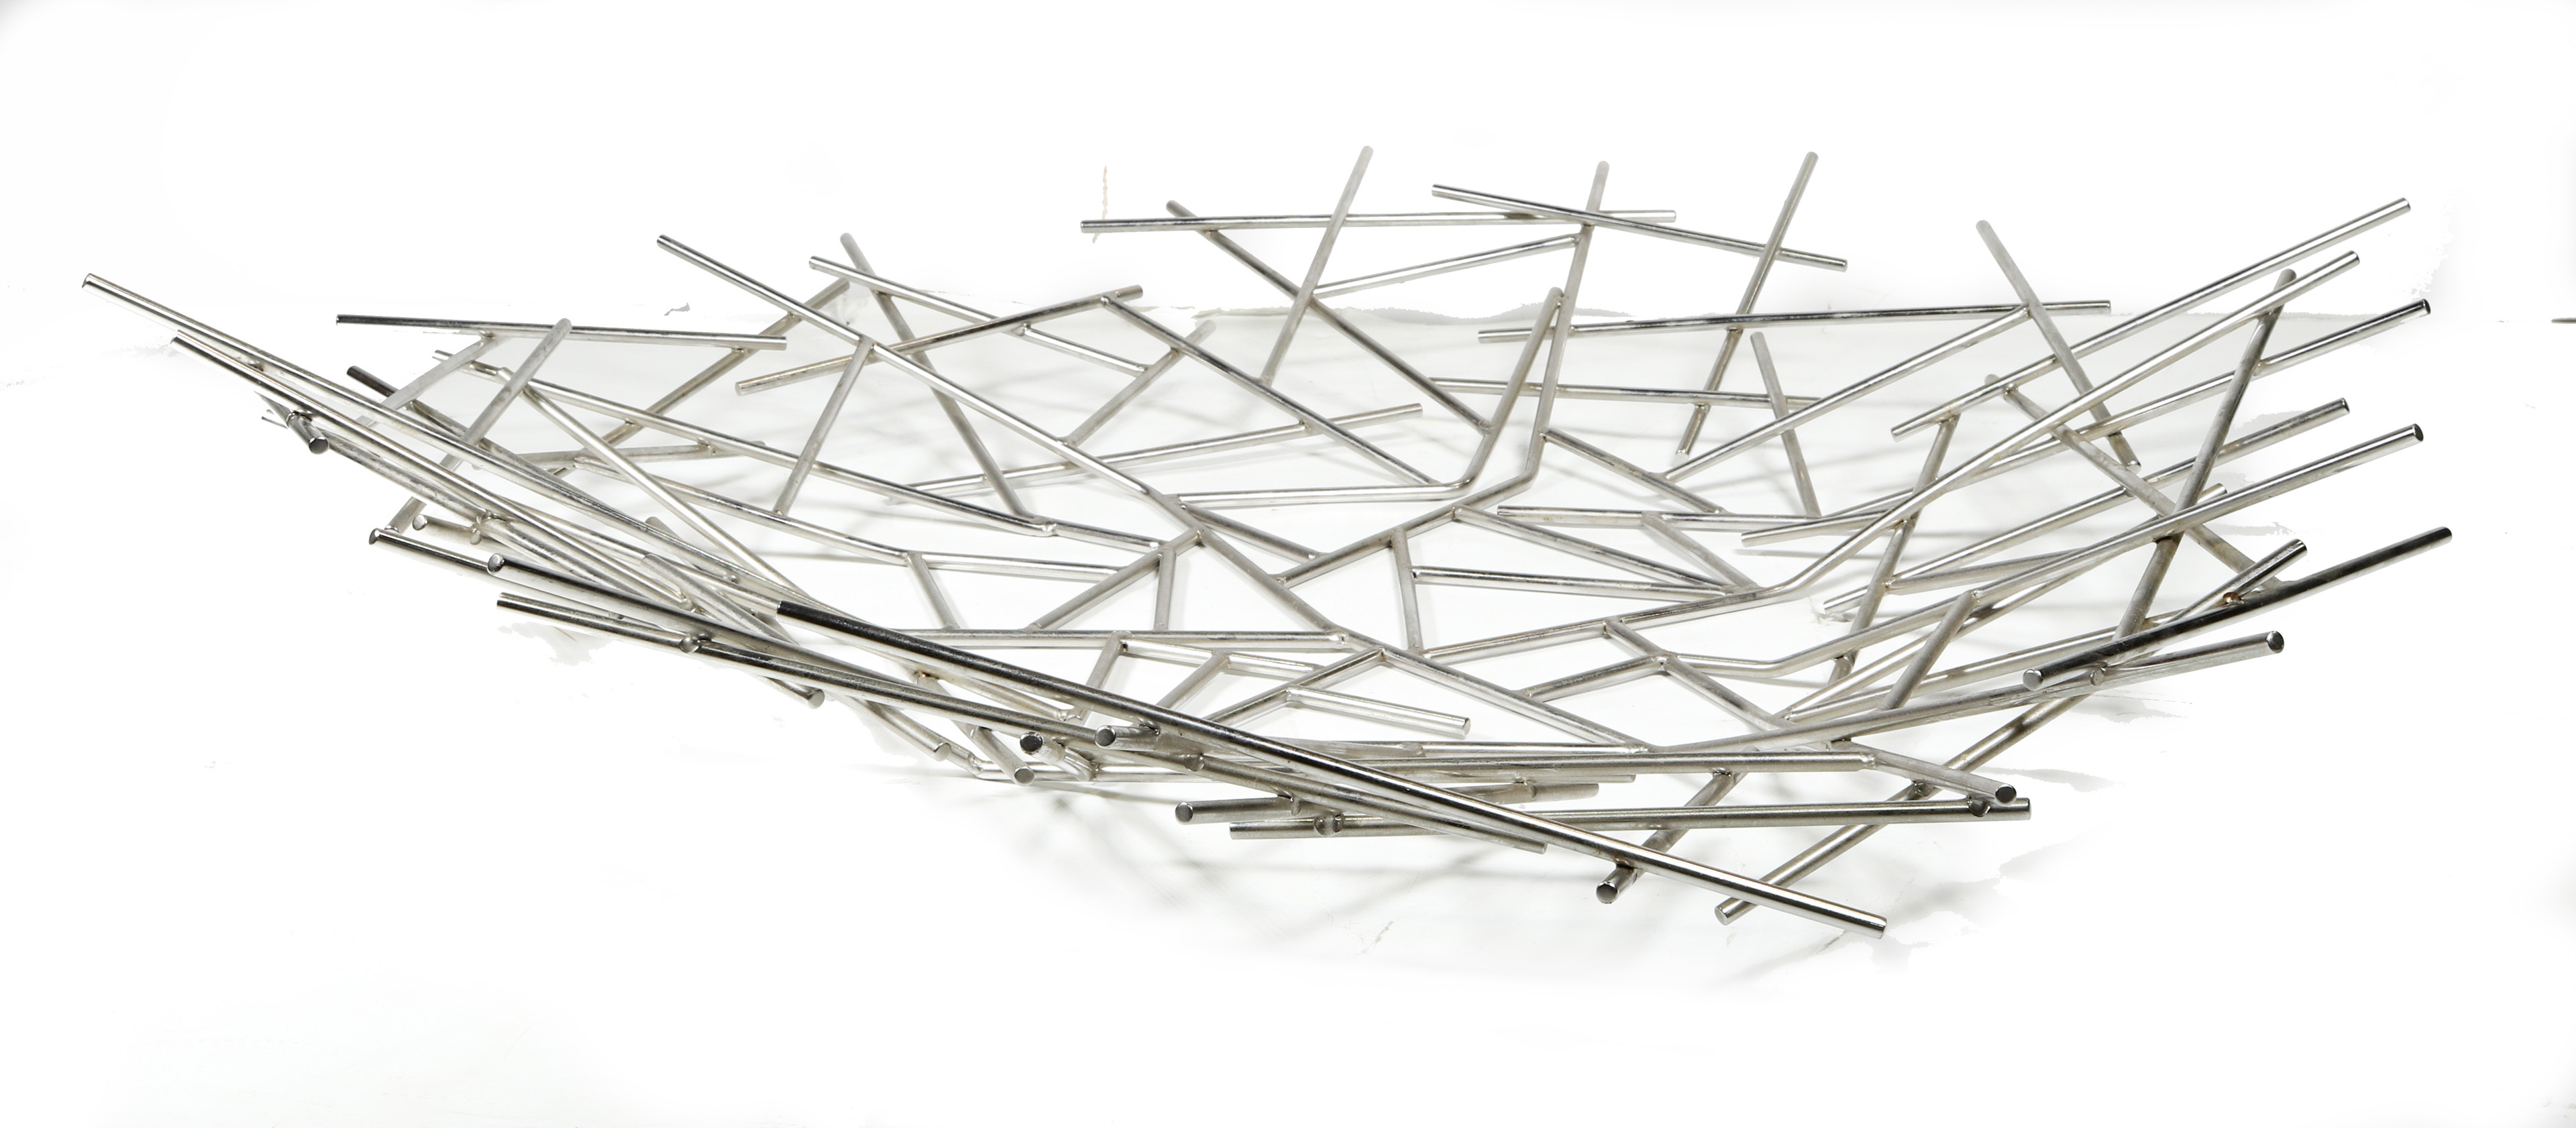 AN ALESSI WIRE BASKET An Alessi 3a64c8